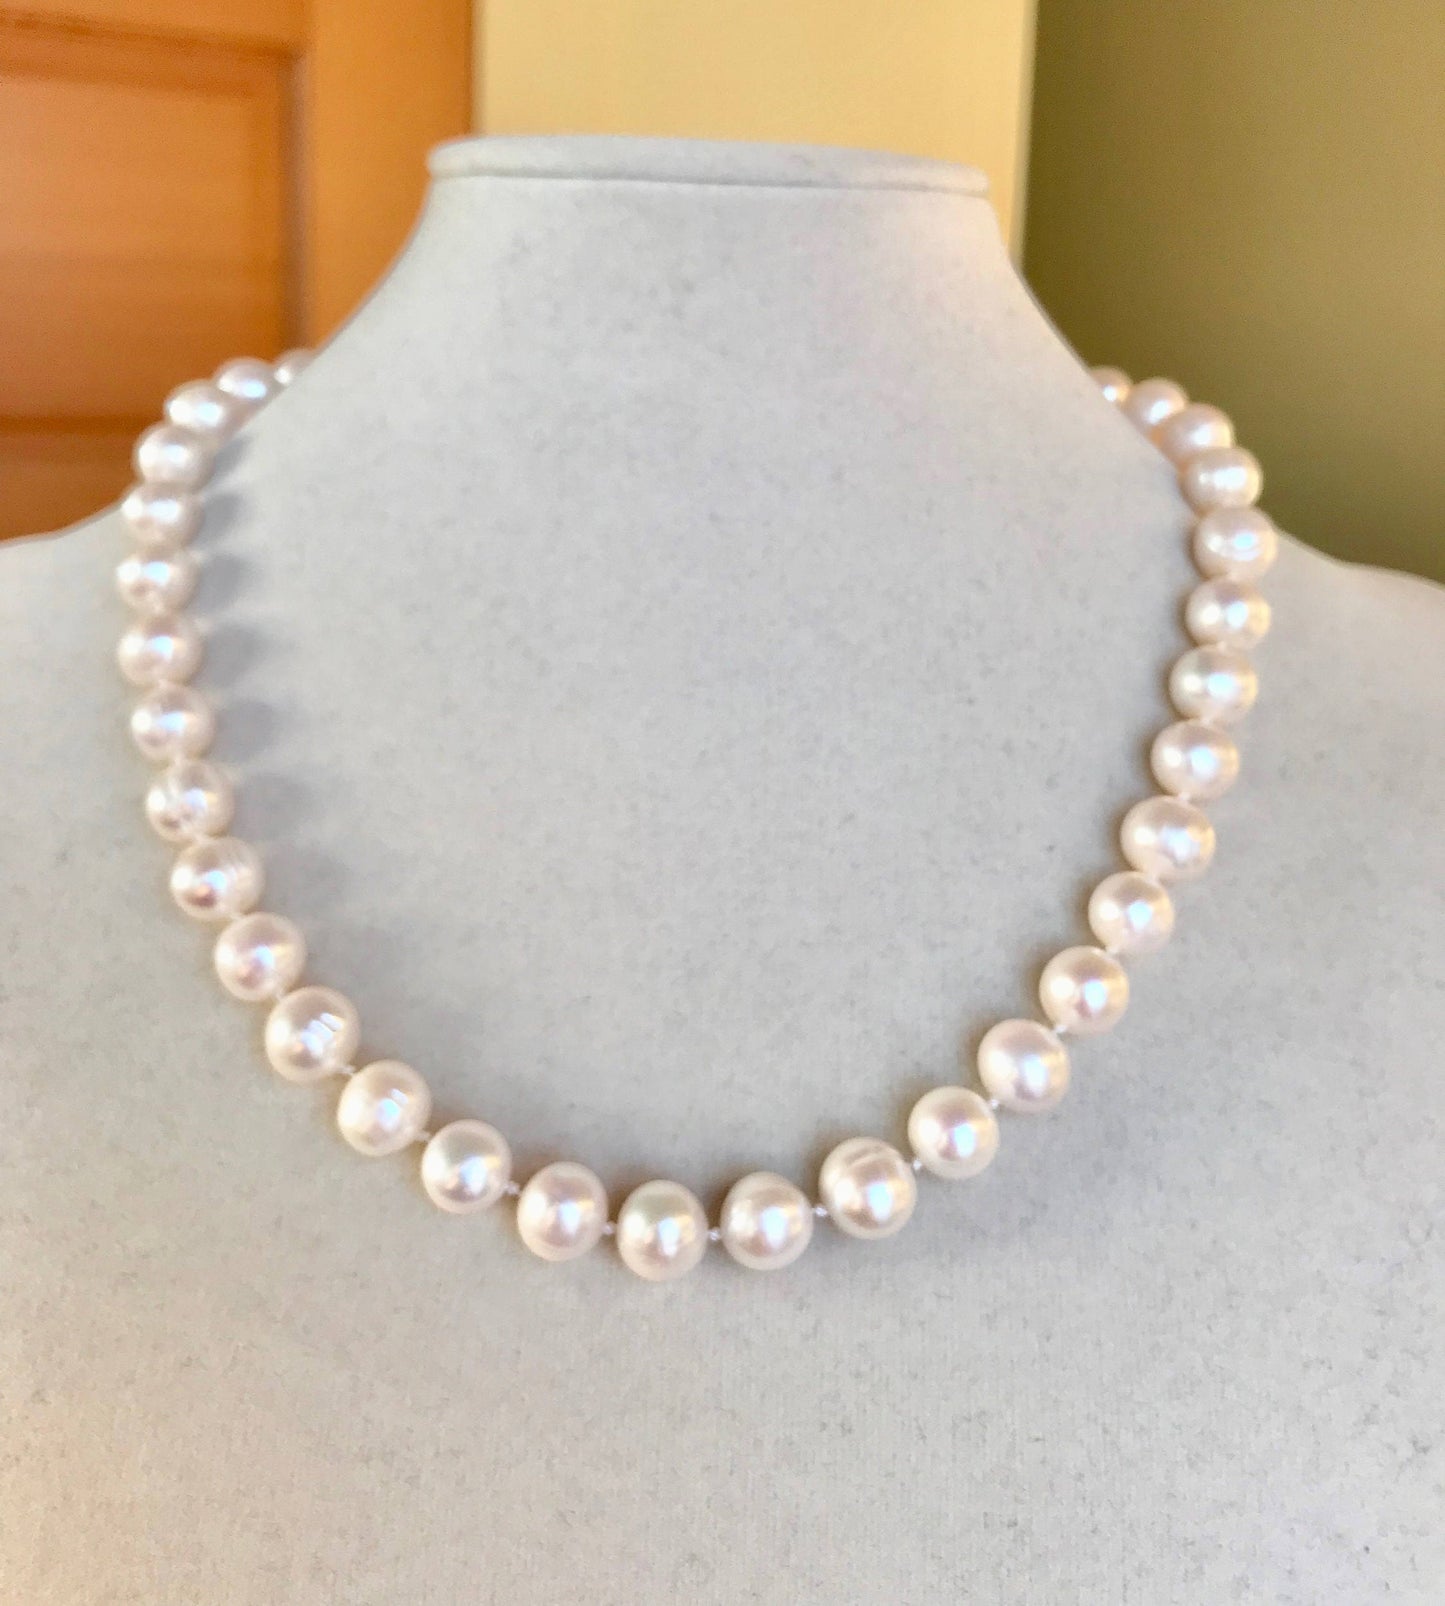 Pearls. Beautiful knotted fresh water pearl necklace. The necklace is finished with a filigree gold clasp.